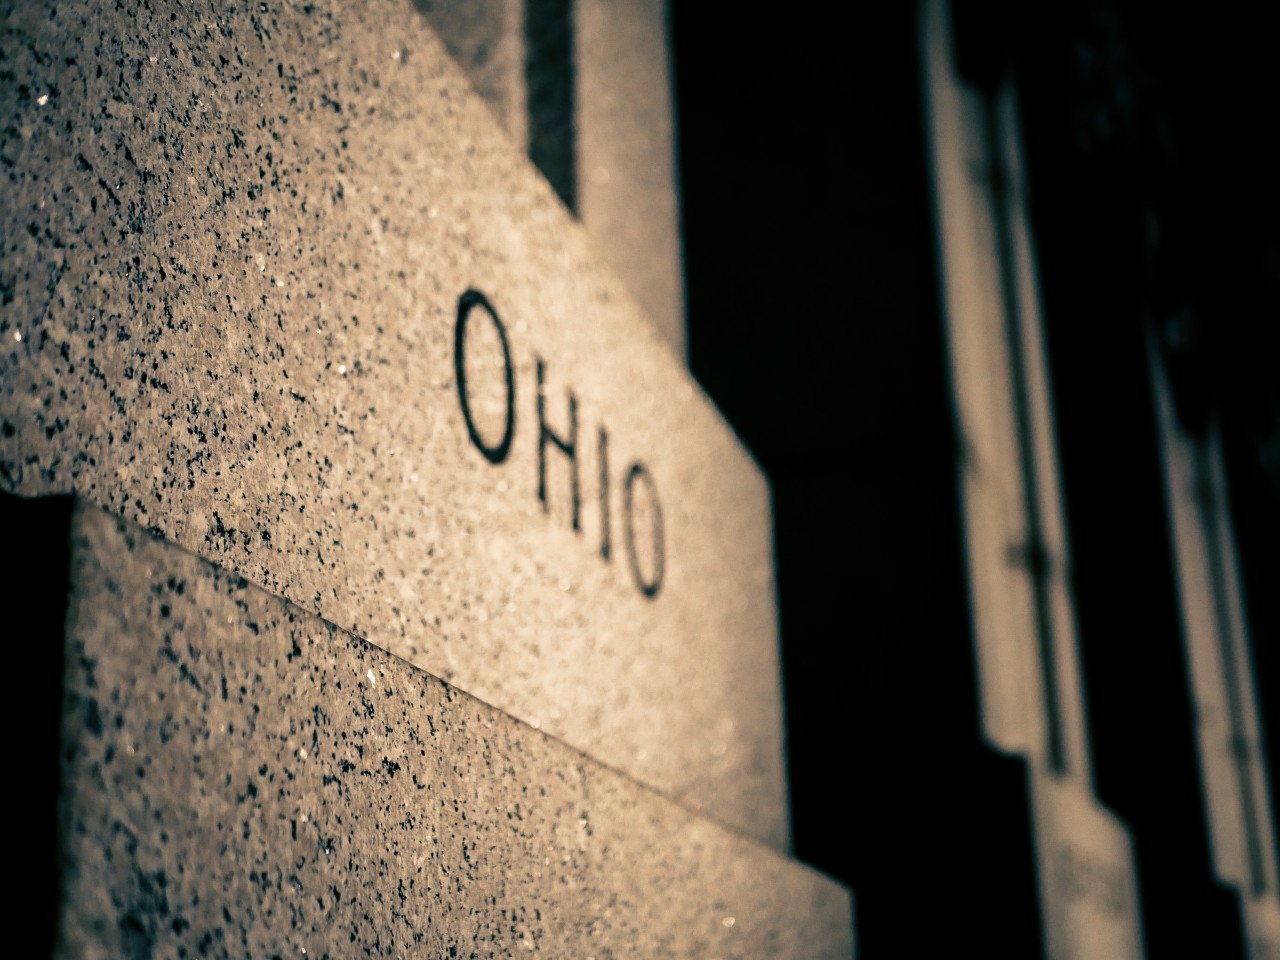 Photo of the word Ohio engraved into stone wall